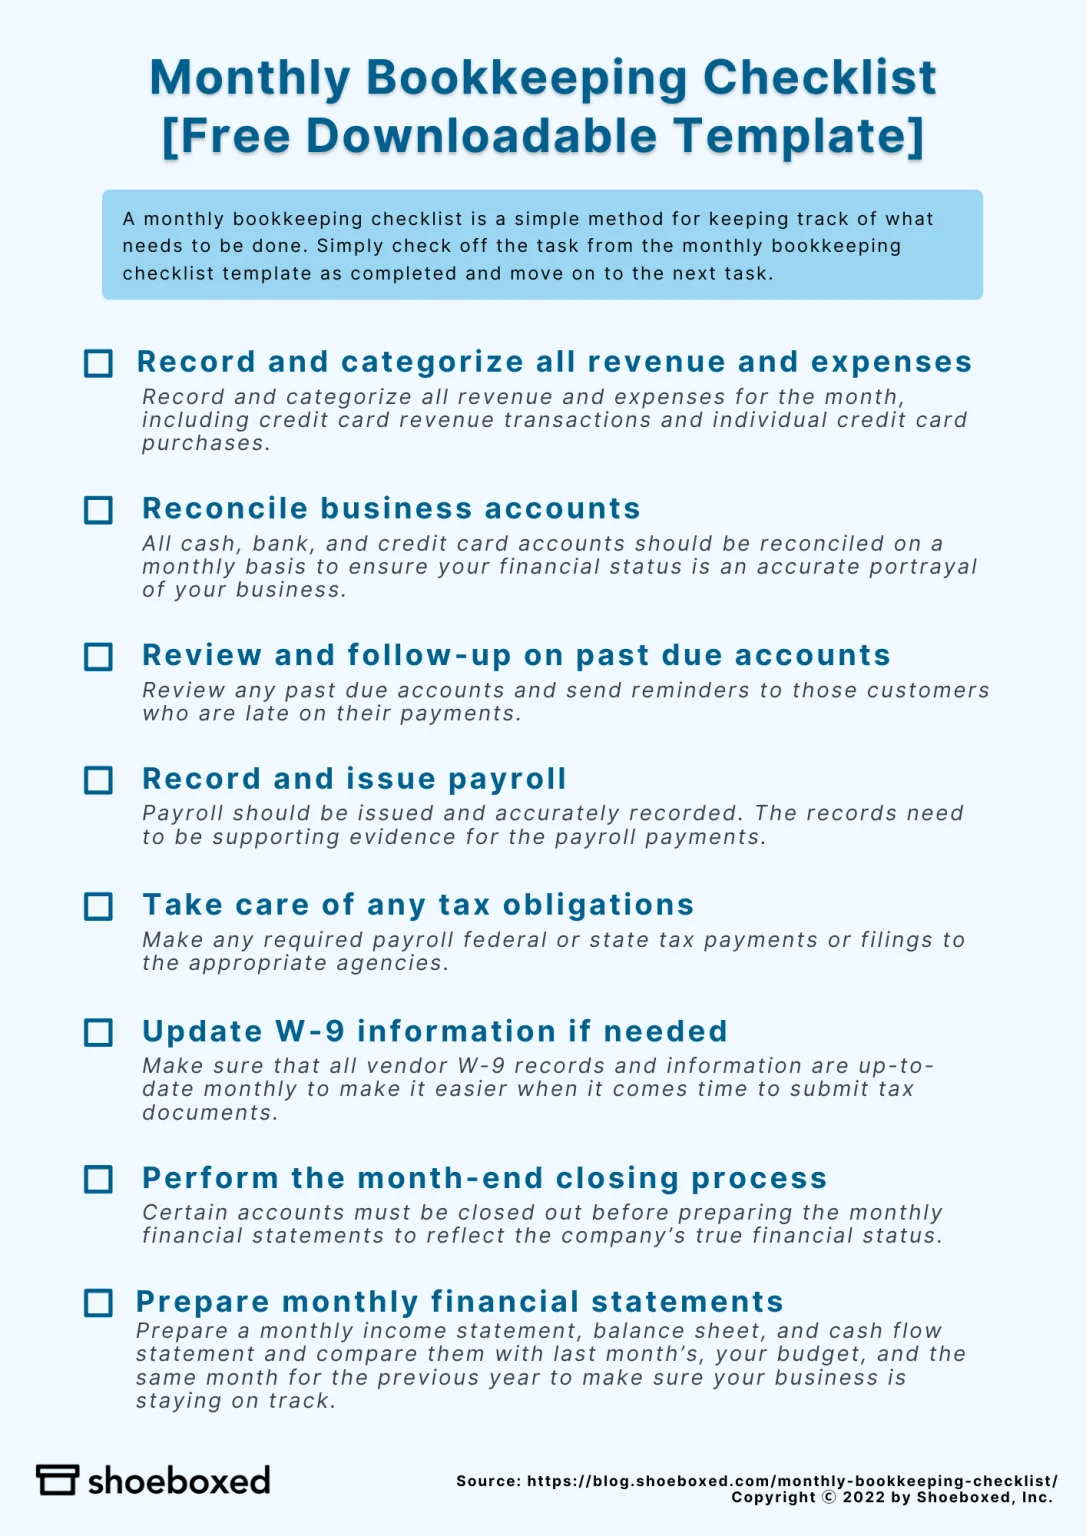 Monthly Bookkeeping Checklist Free Downloadable Template